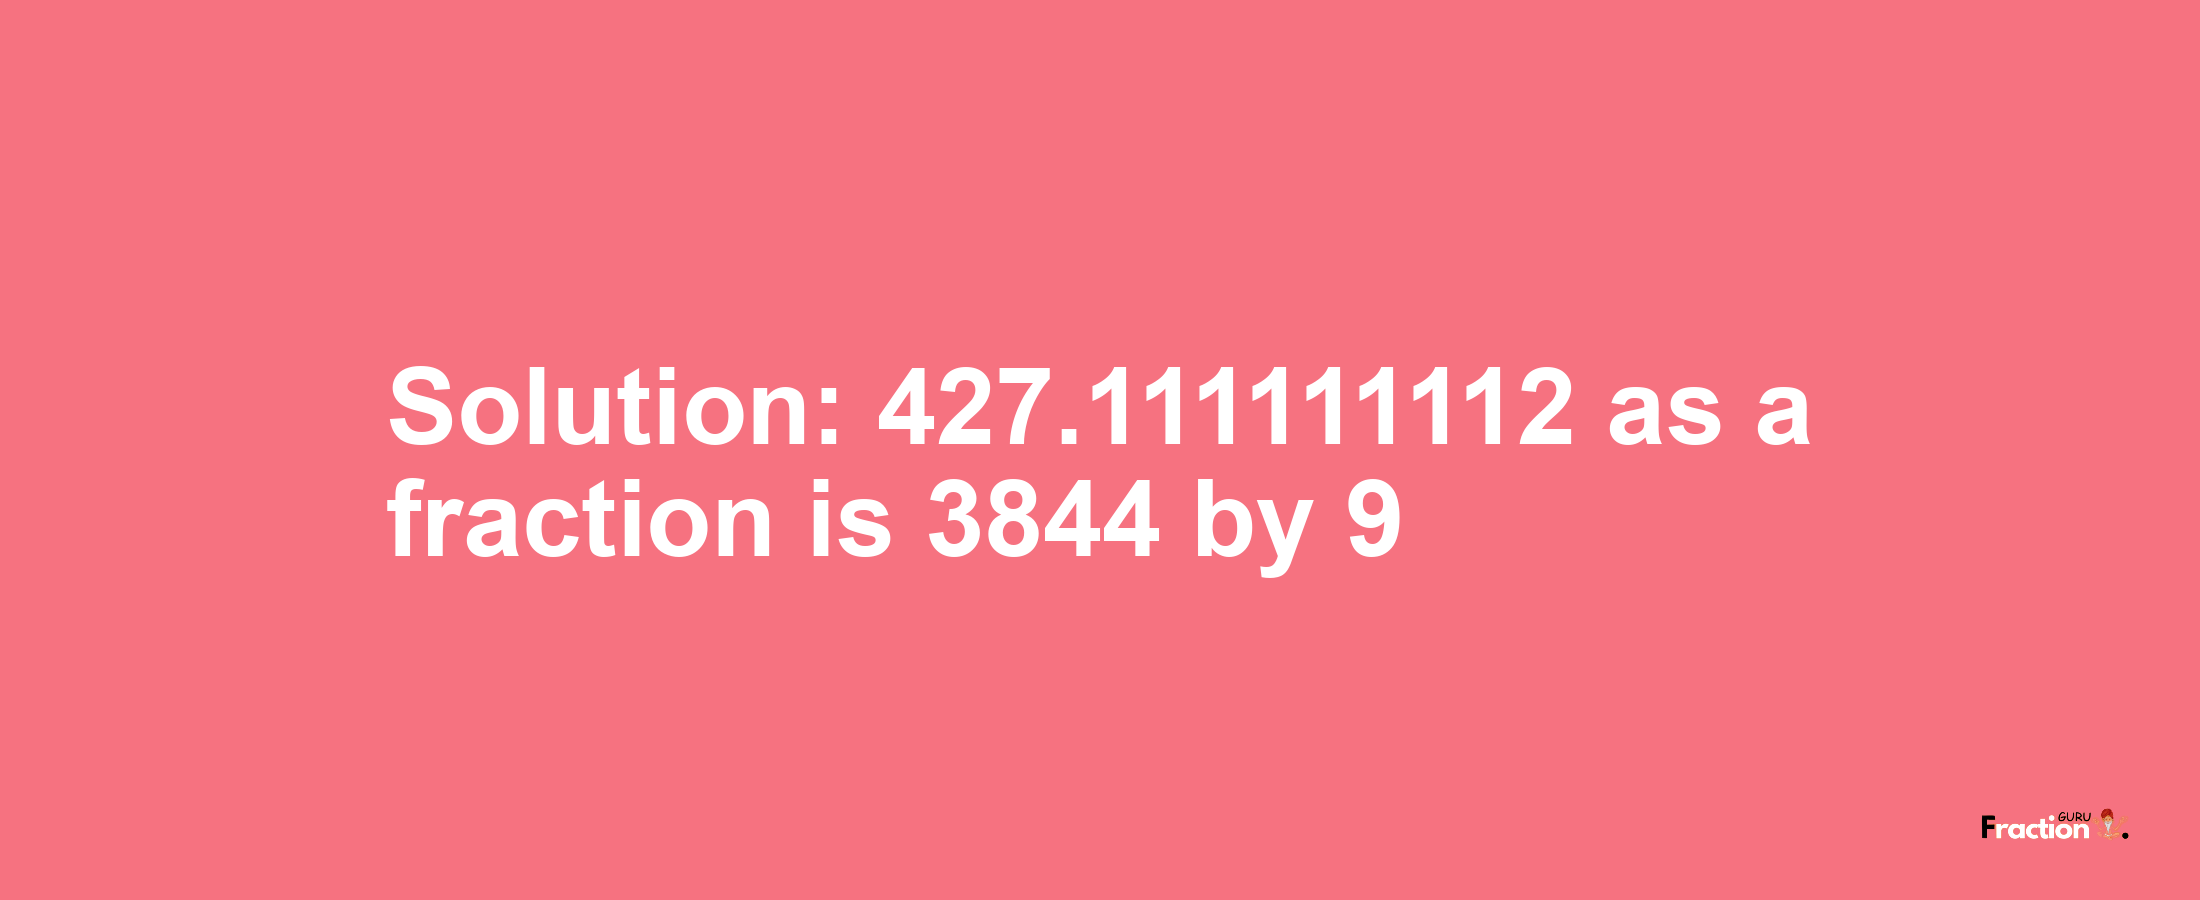 Solution:427.111111112 as a fraction is 3844/9